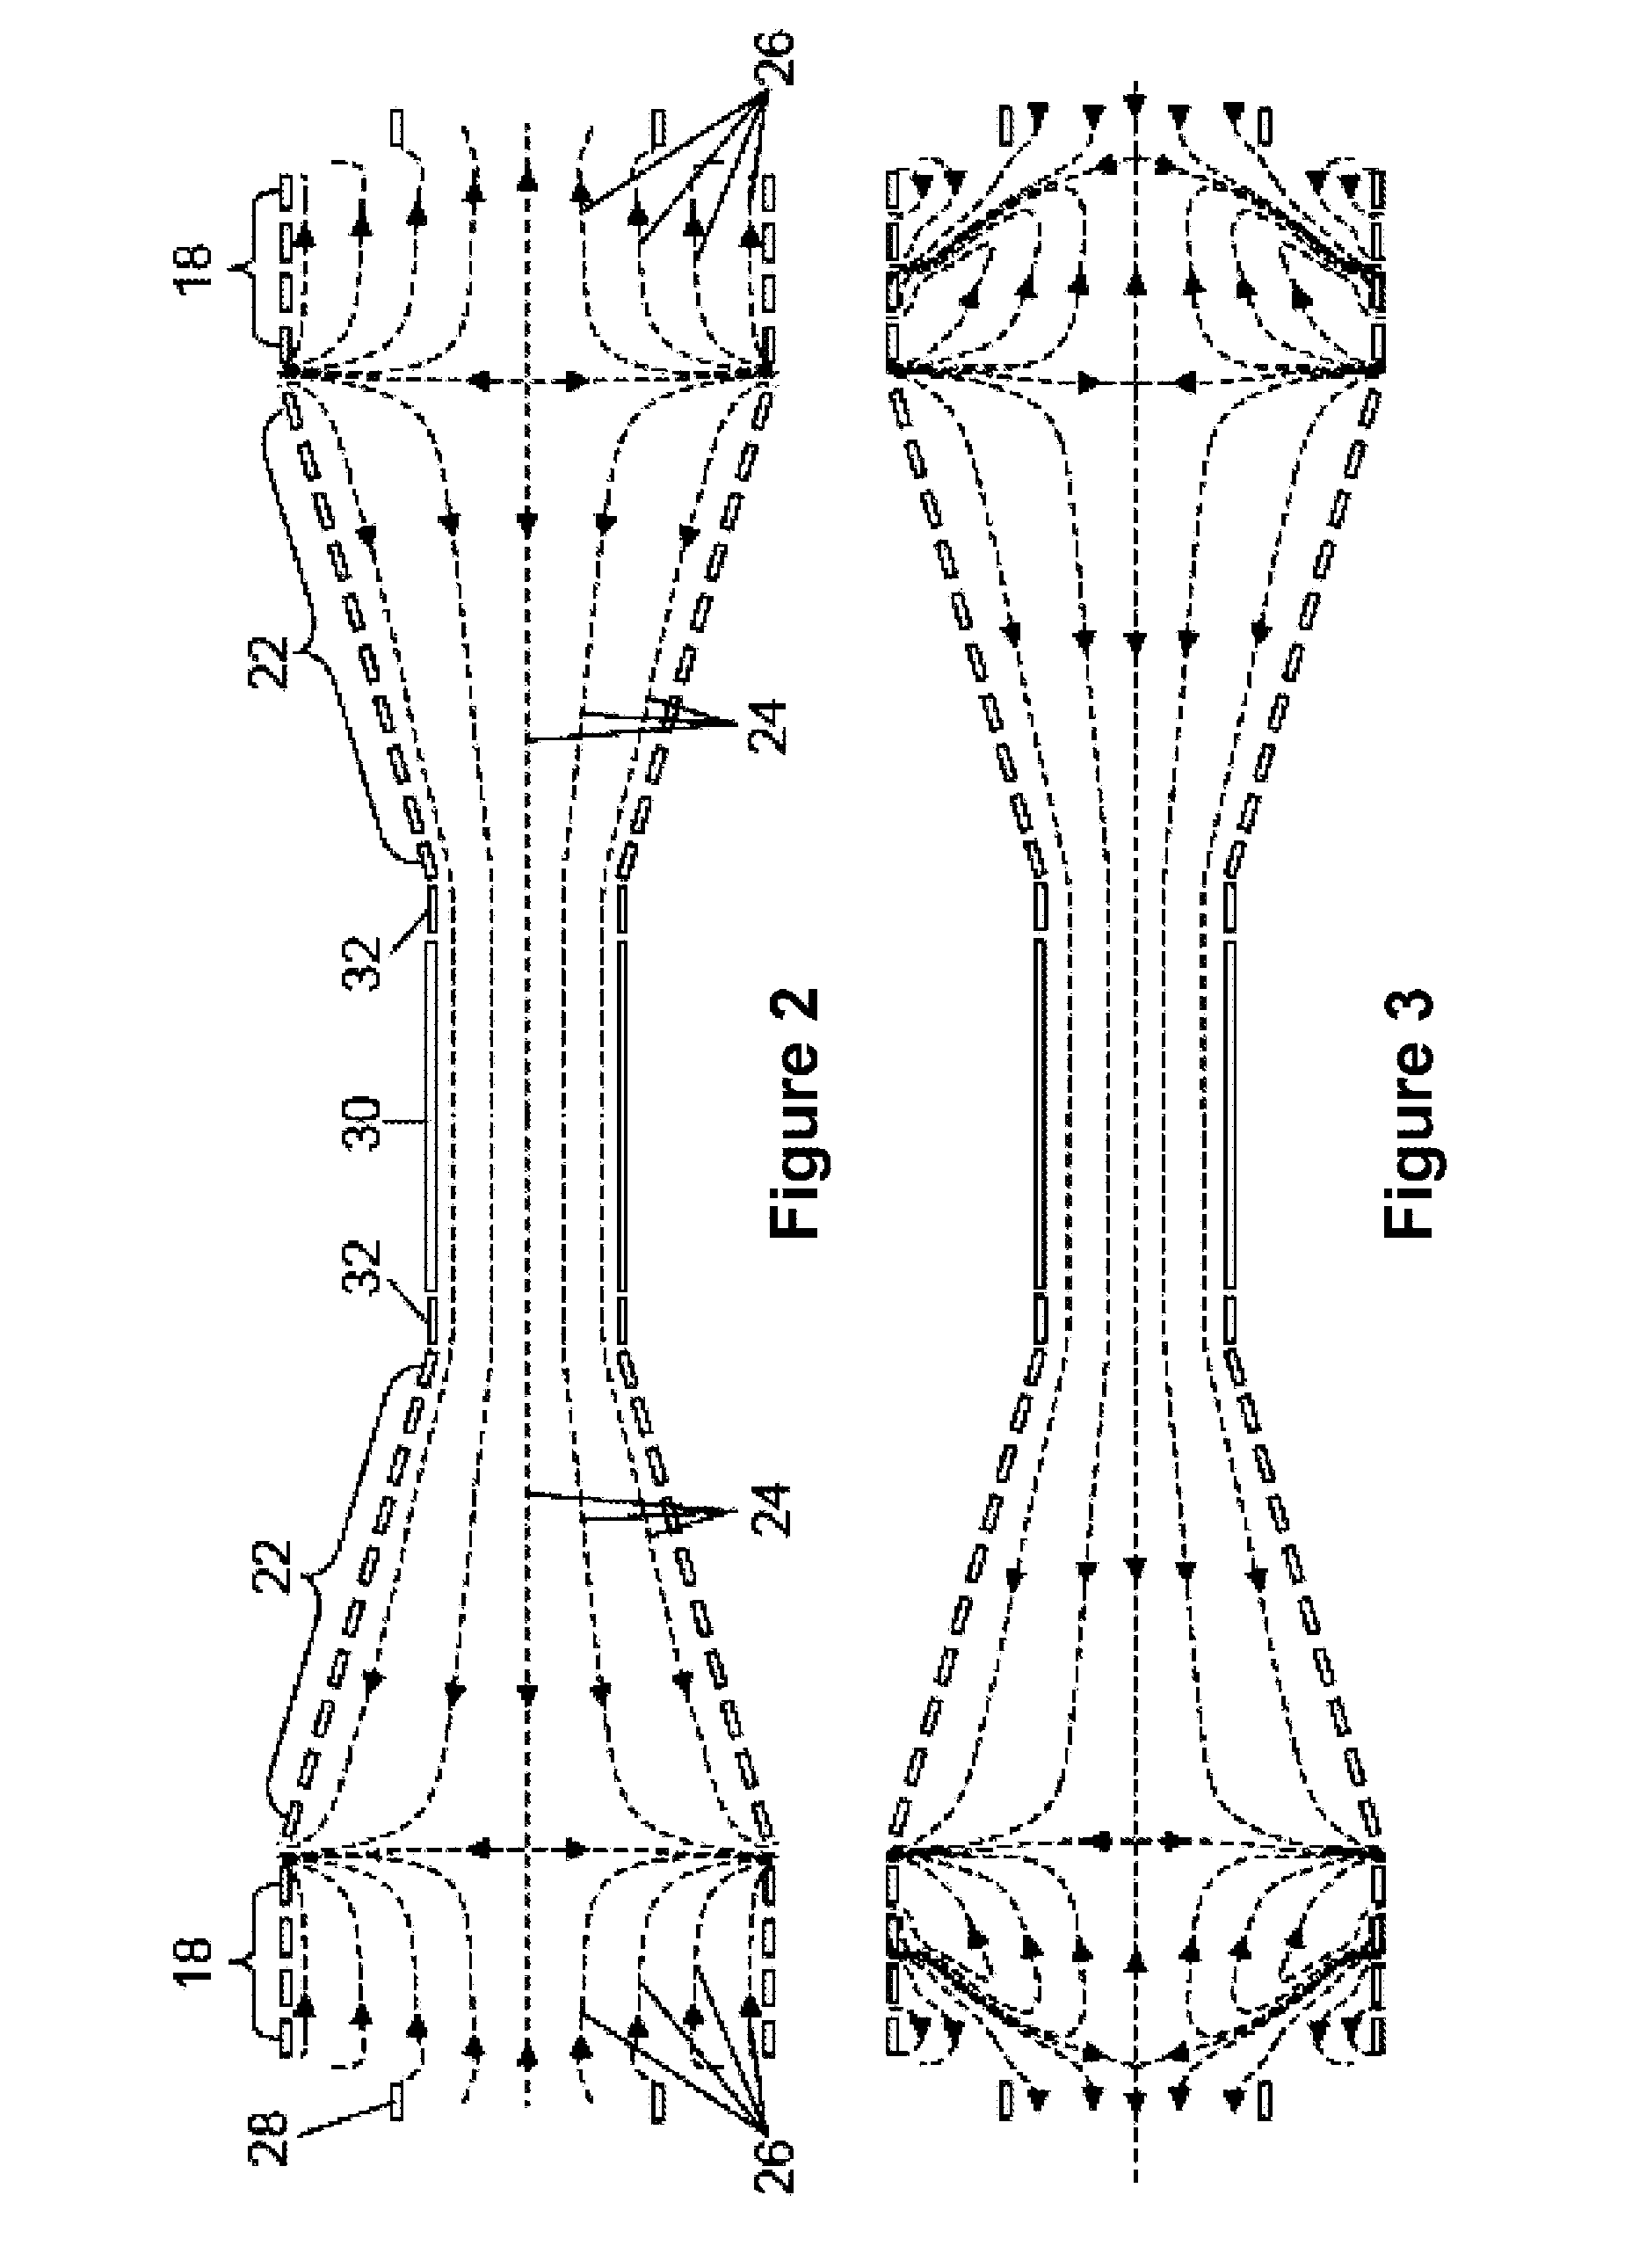 Method and apparatus for the generation, heating and/or compression of plasmoids and/or recovery of energy therefrom